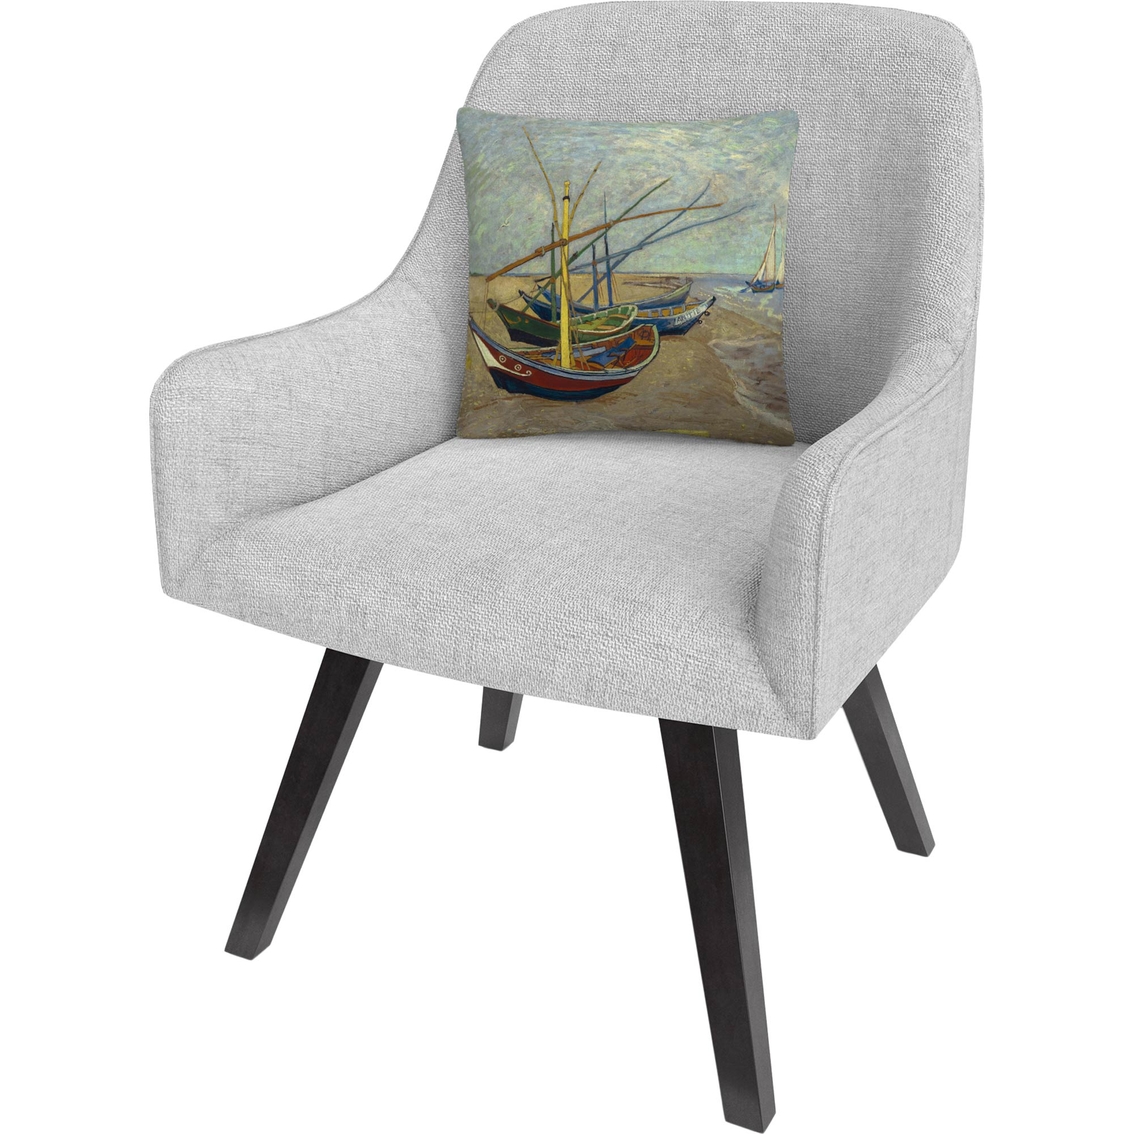 Trademark Fine Art Vincent van Gogh Fishing Boats on the Beach Throw Pillow - Image 2 of 3